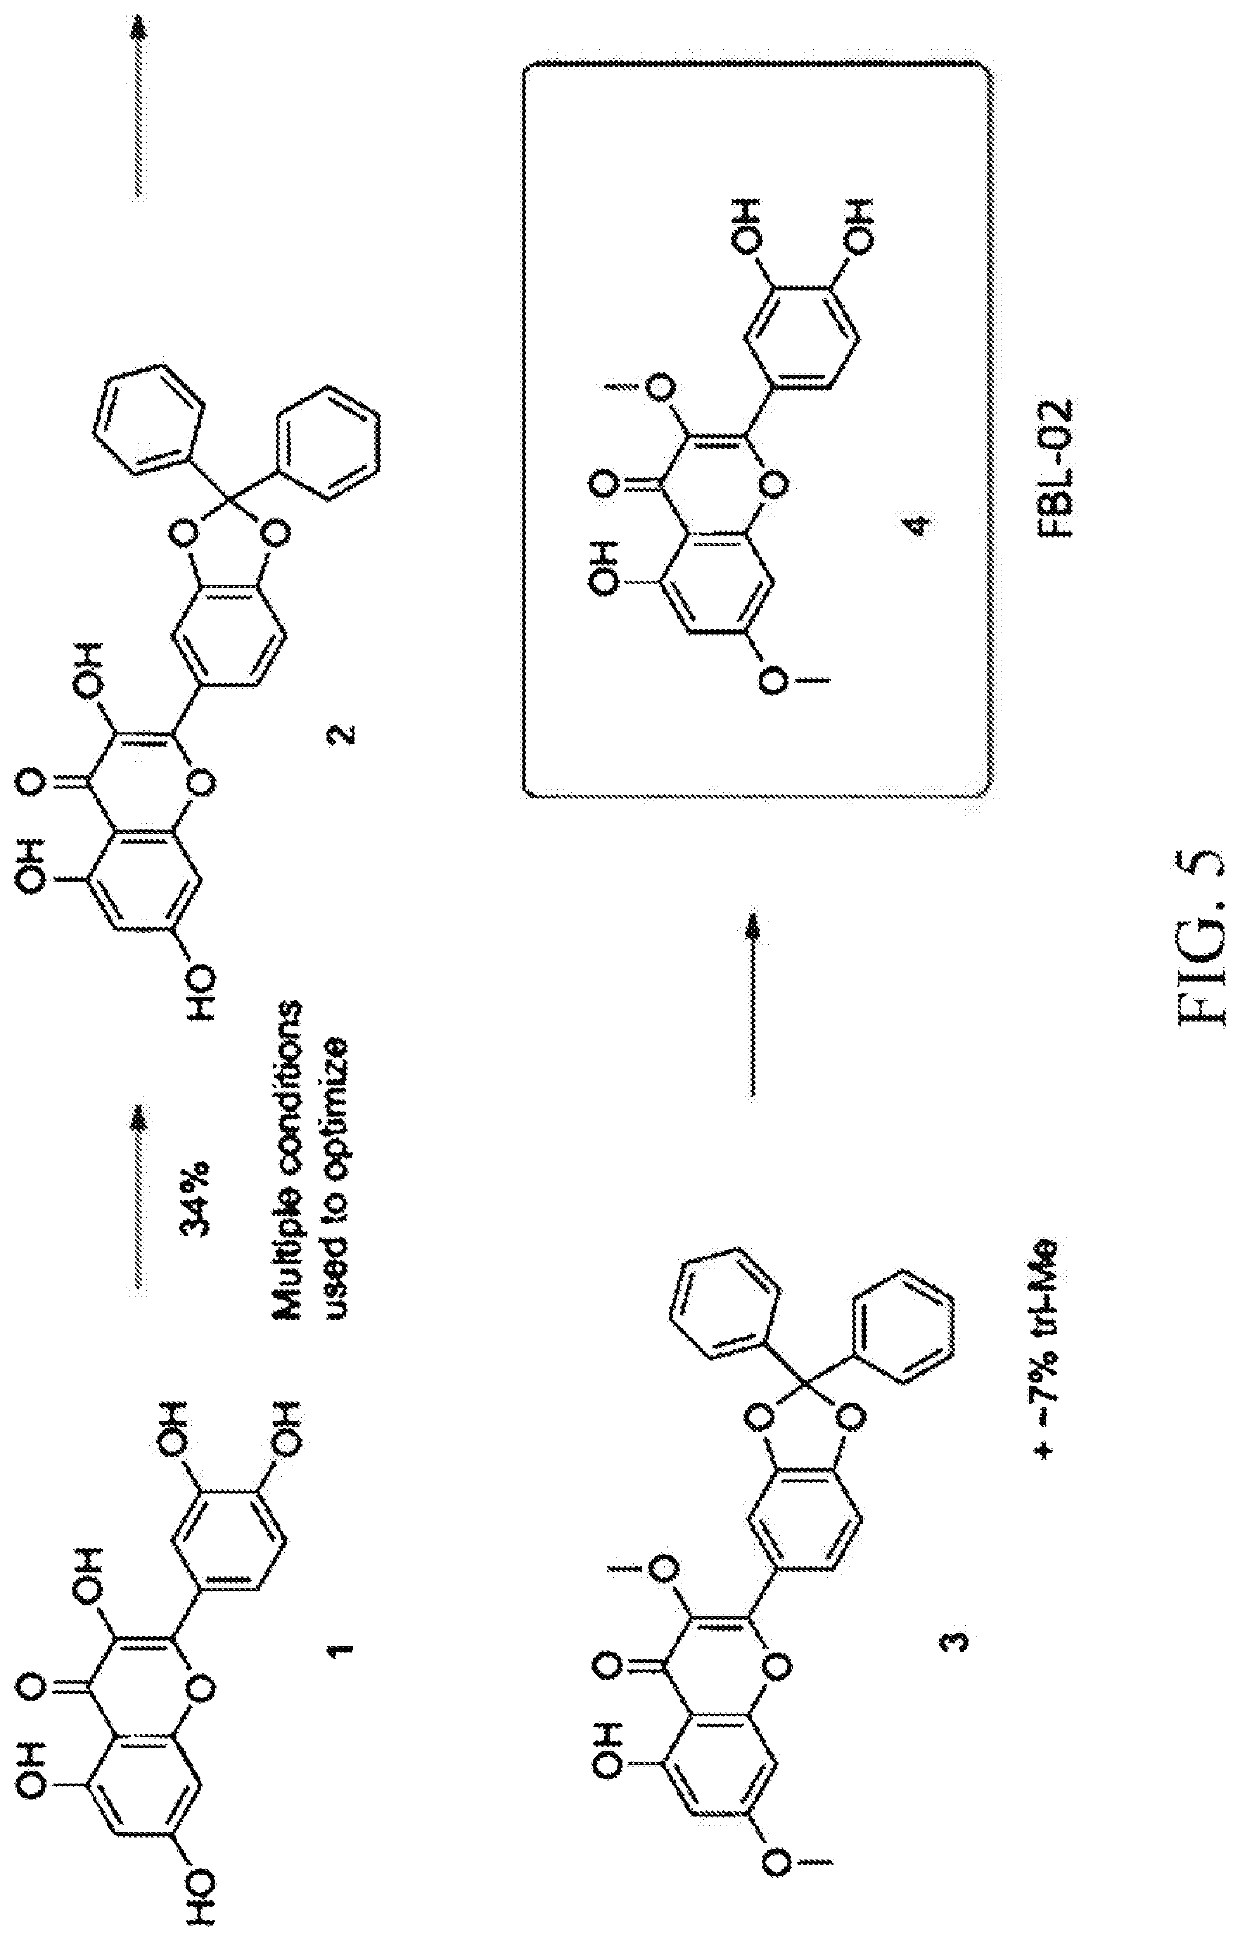 Pi 4-kinase inhibitor as a therapeutic for viral hepatitis, cancer, malaria. autoimmune disorders and inflammation, and a radiosensitizer and immunosuppressant